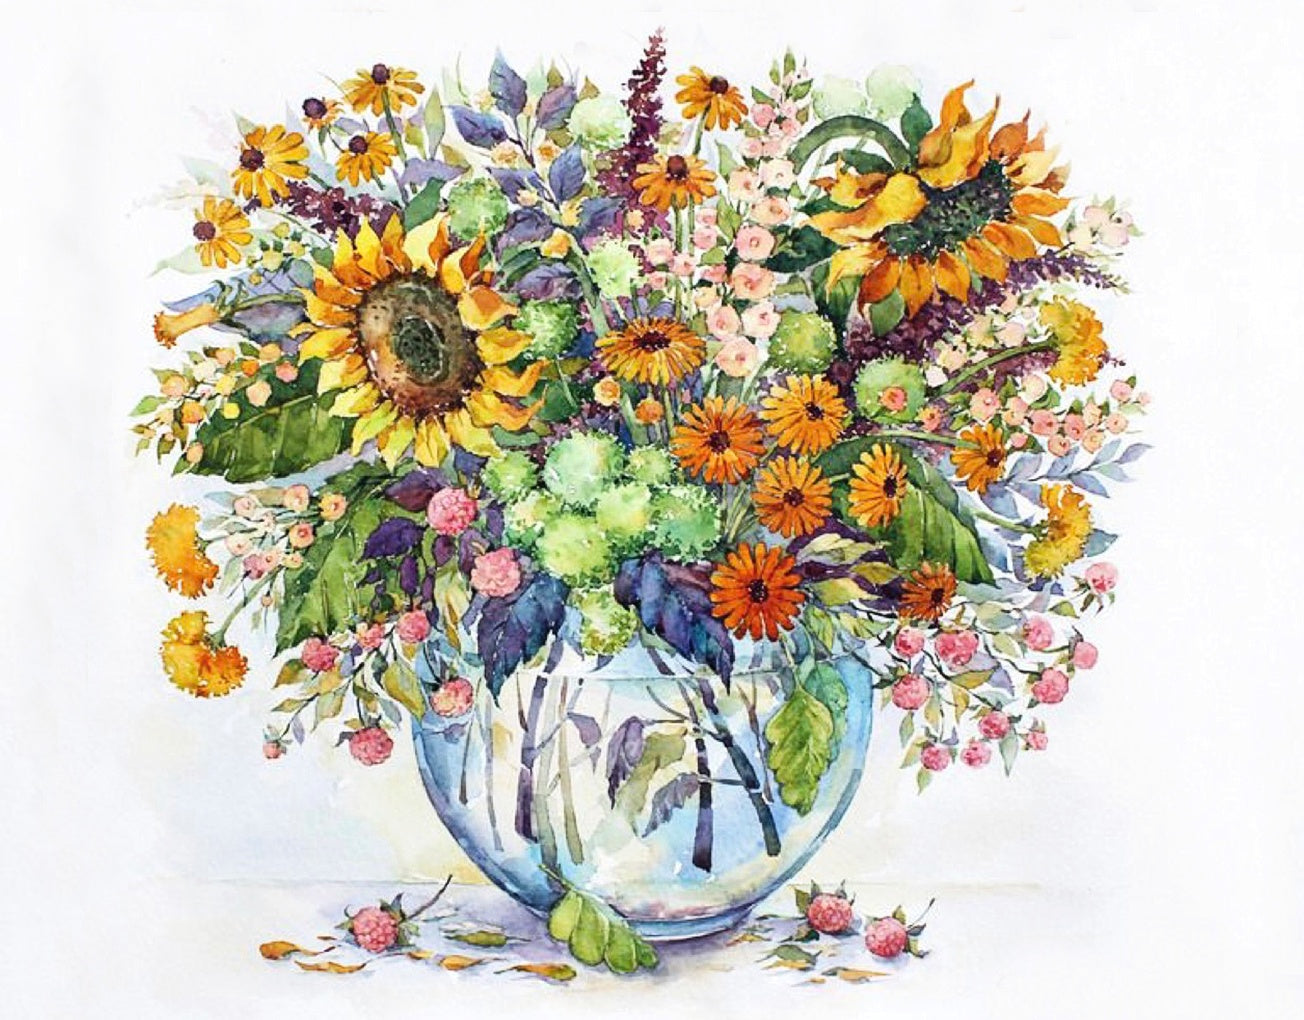 Diamond painting - LG027e - Sunflowers in a Vase Image 1